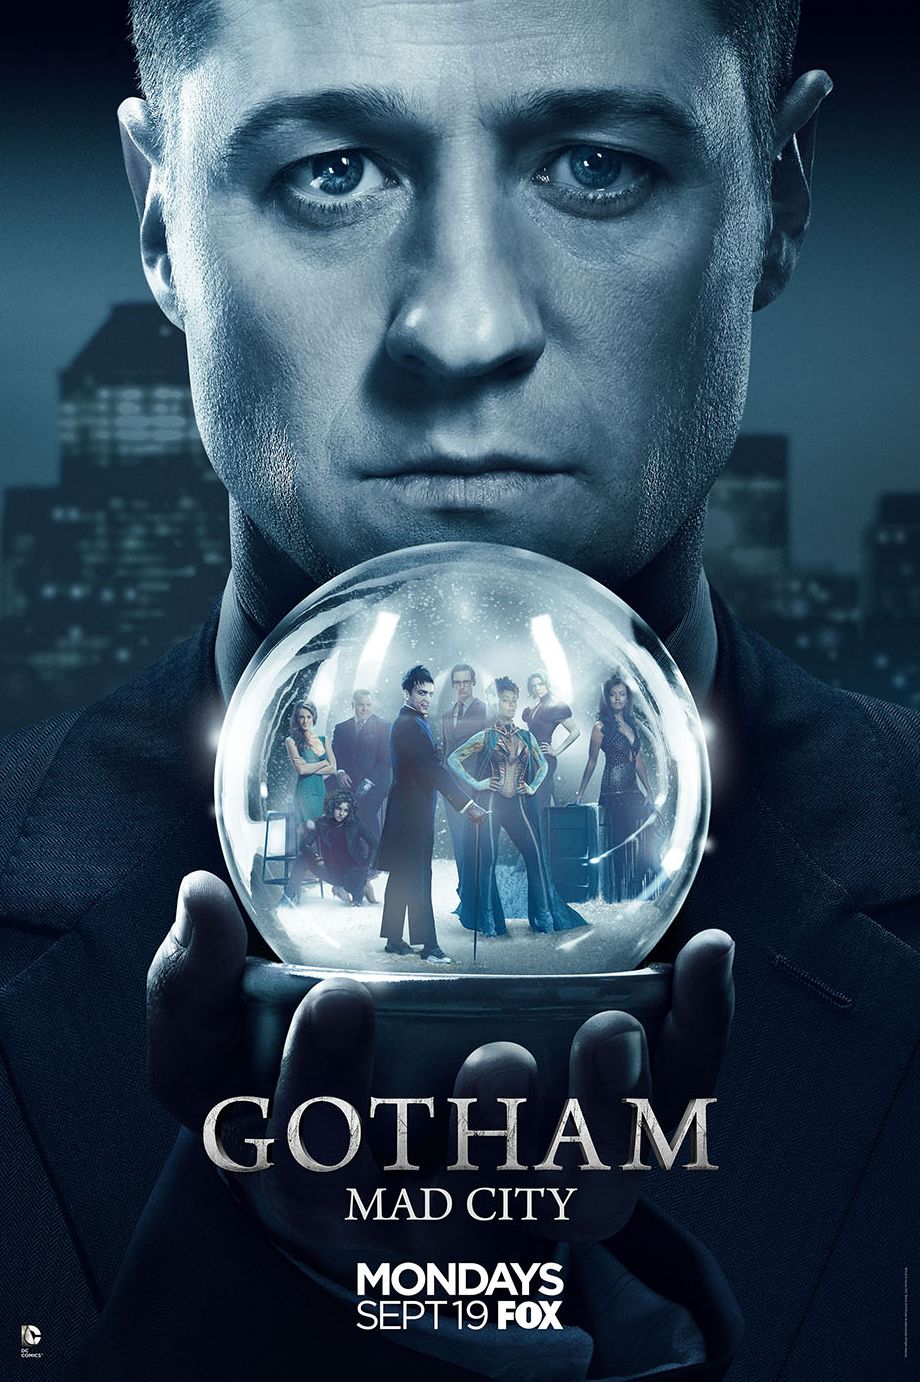 New poster unveiled for season 3 of &#039;Gotham&#039;